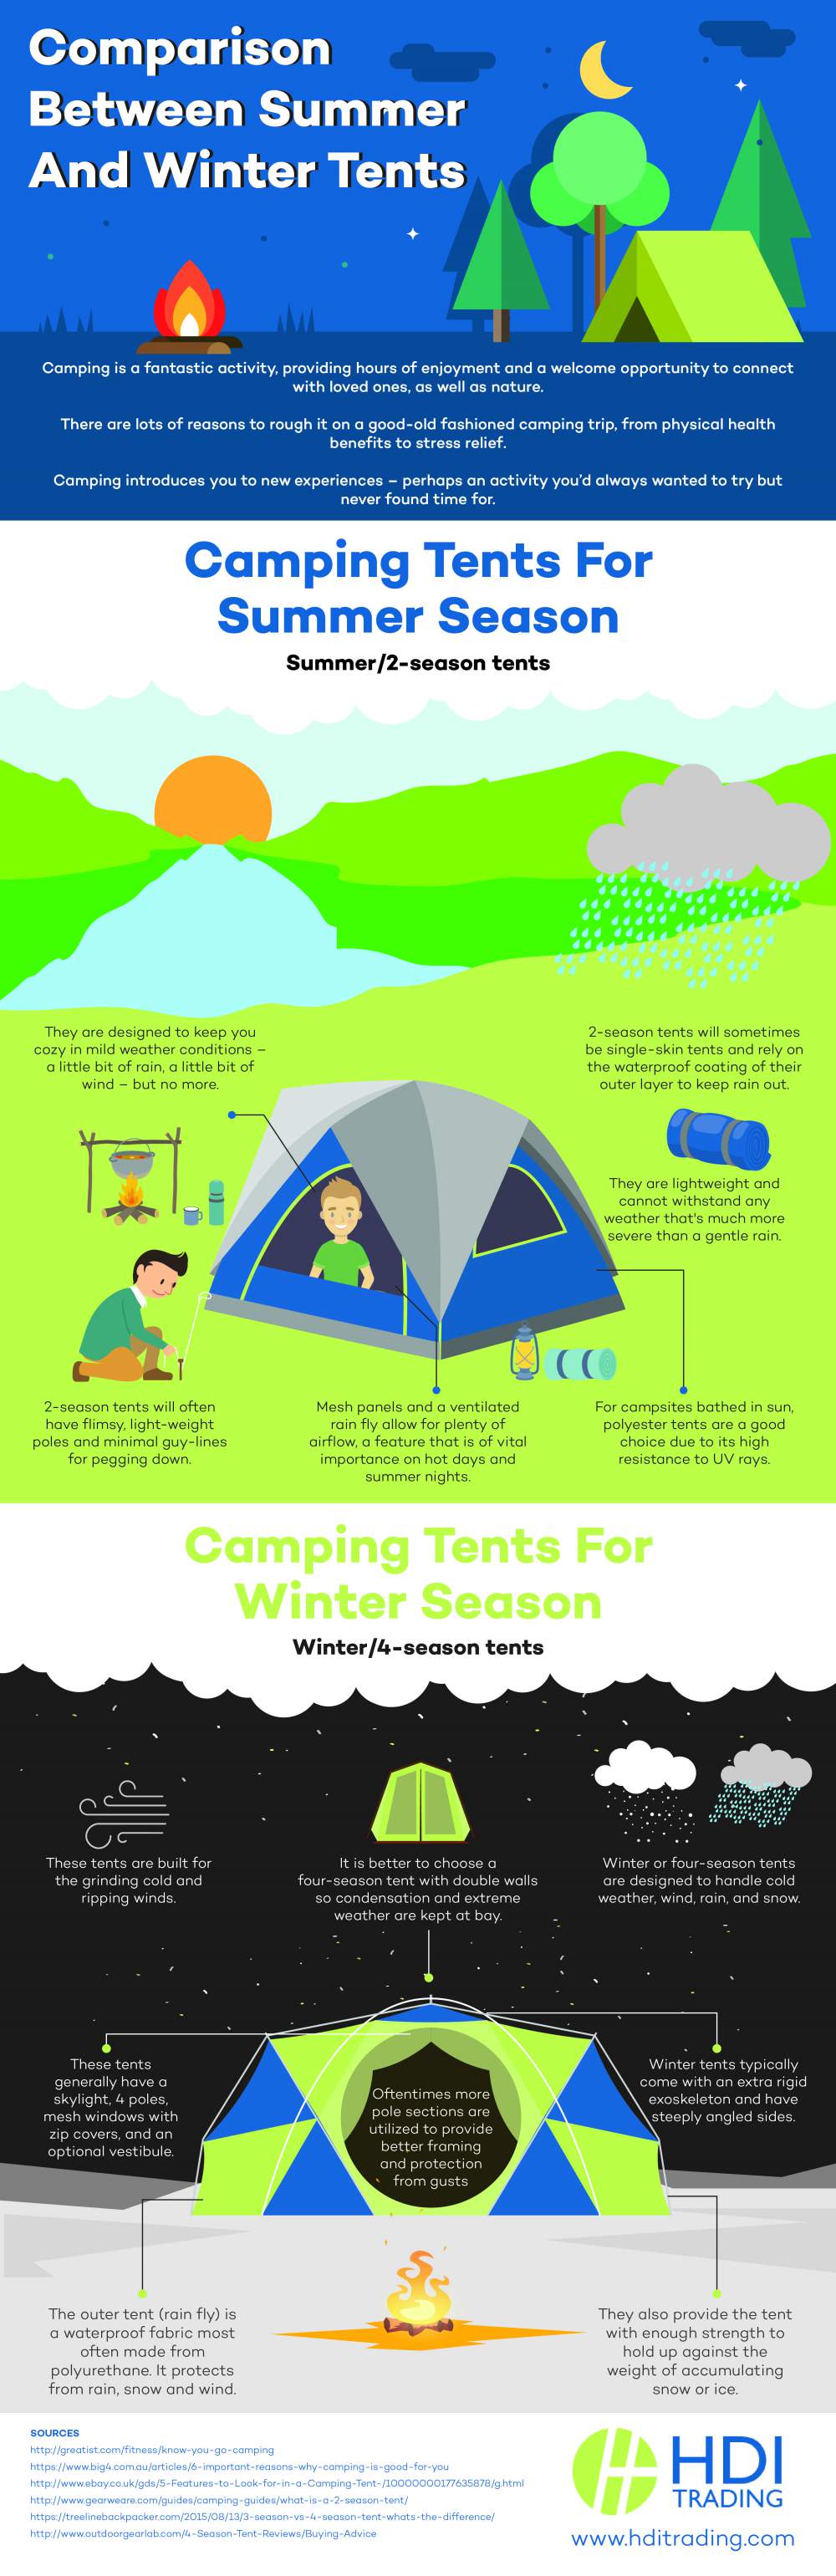 Summer and Winter Tents